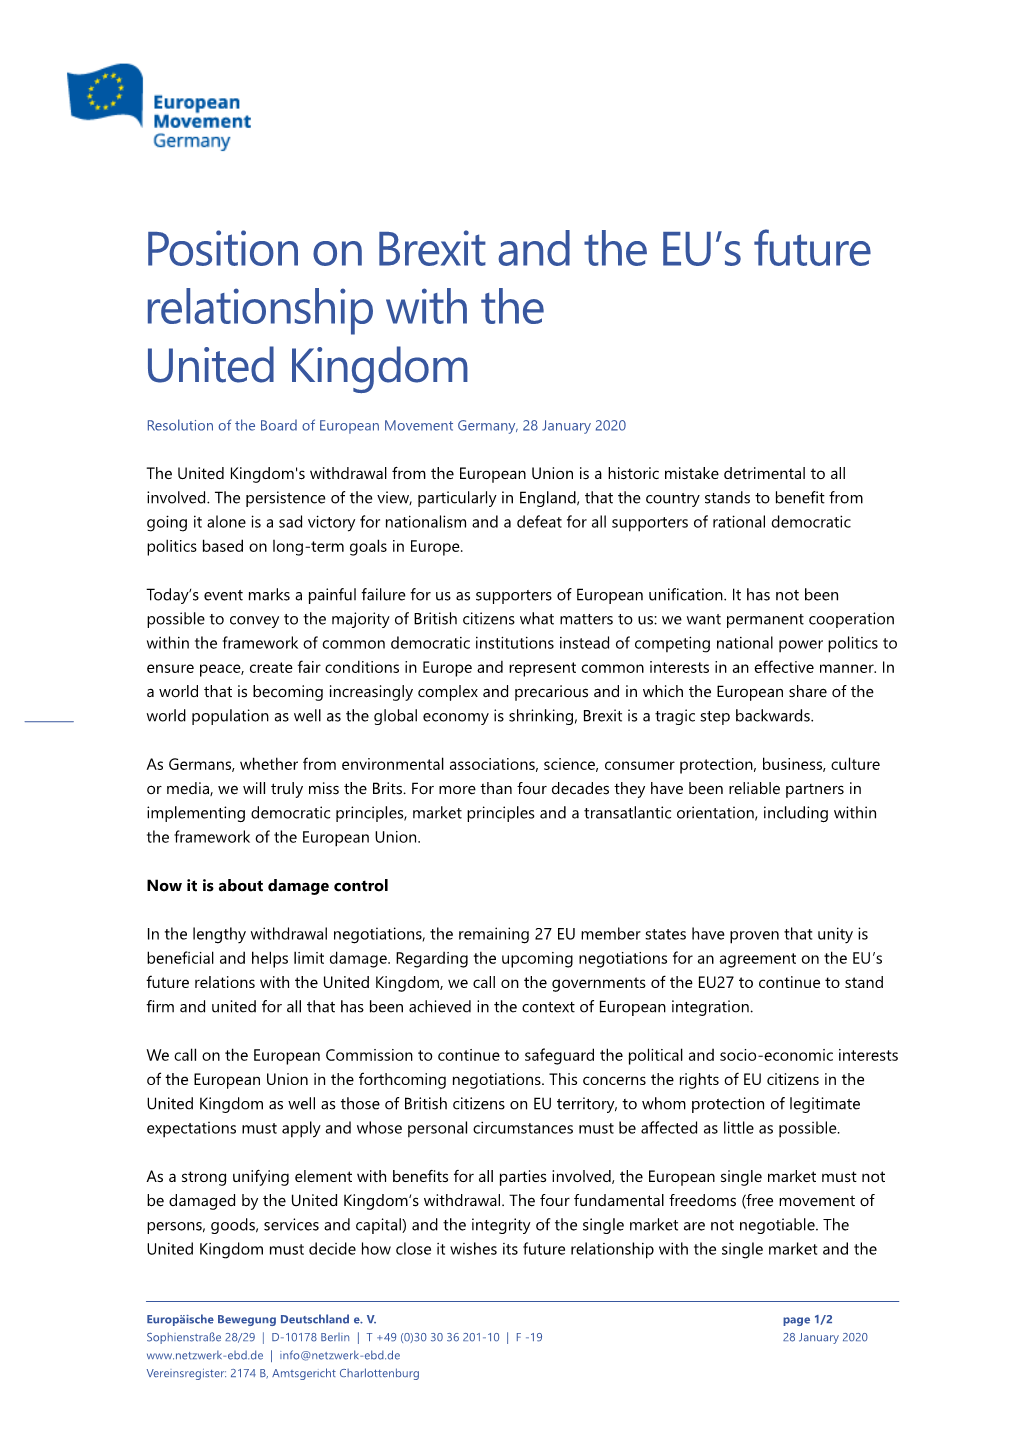 Position on Brexit and the EU's Future Relationship with the United Kingdom